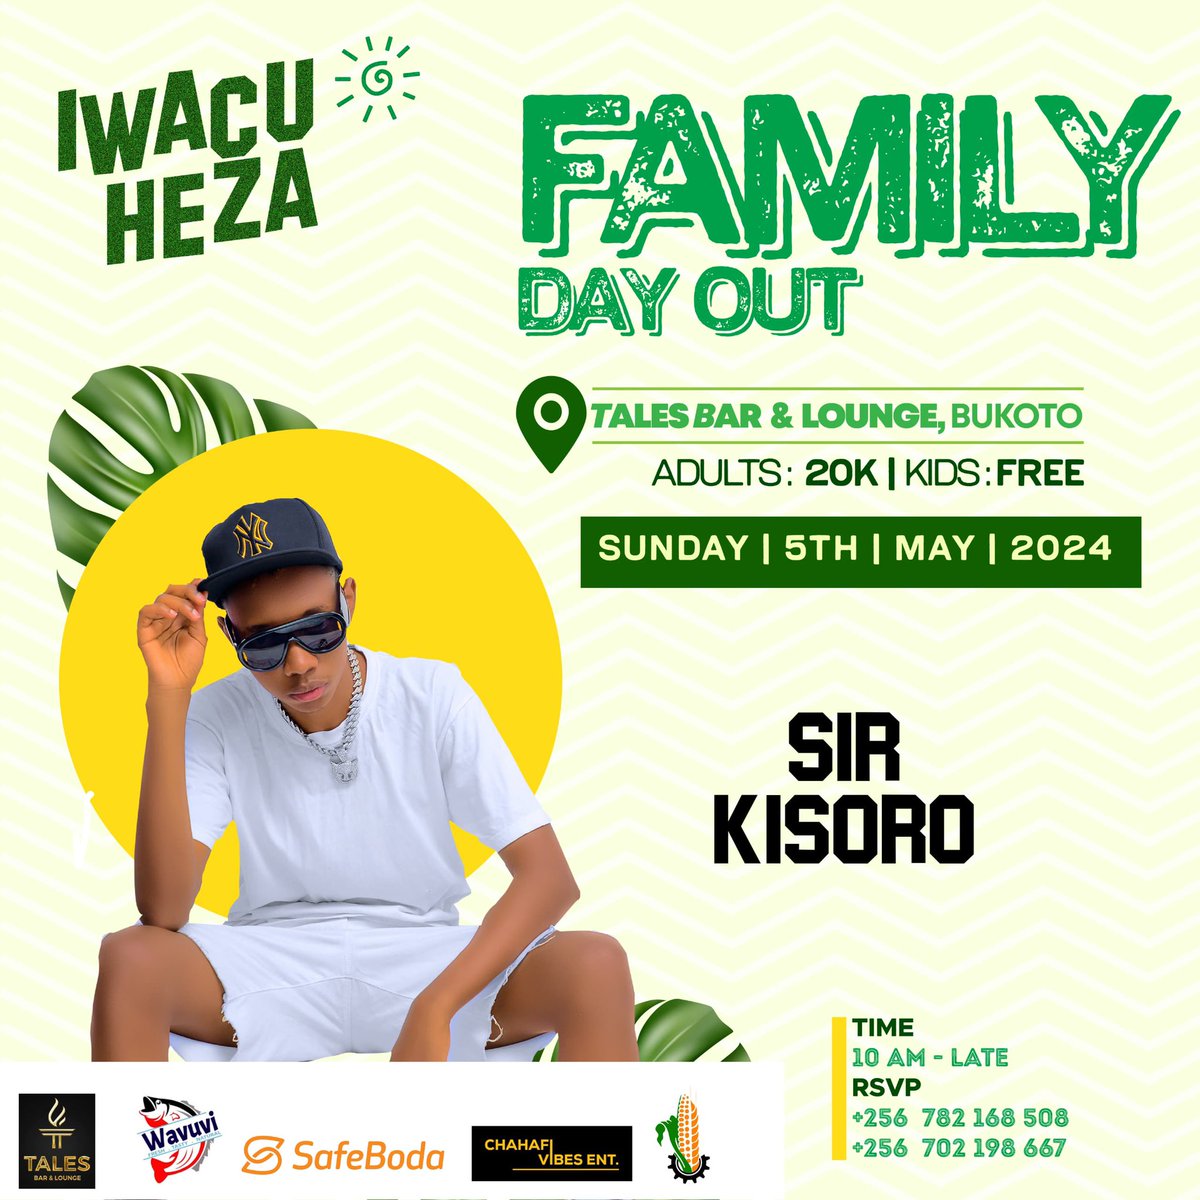 We begin the #FamilyDayOut week like this😊

Our own @Hayes_willit will be bring the amapiano vibes come this Sunday 😇

#IwacuHeza 
#TweseTuribamwe